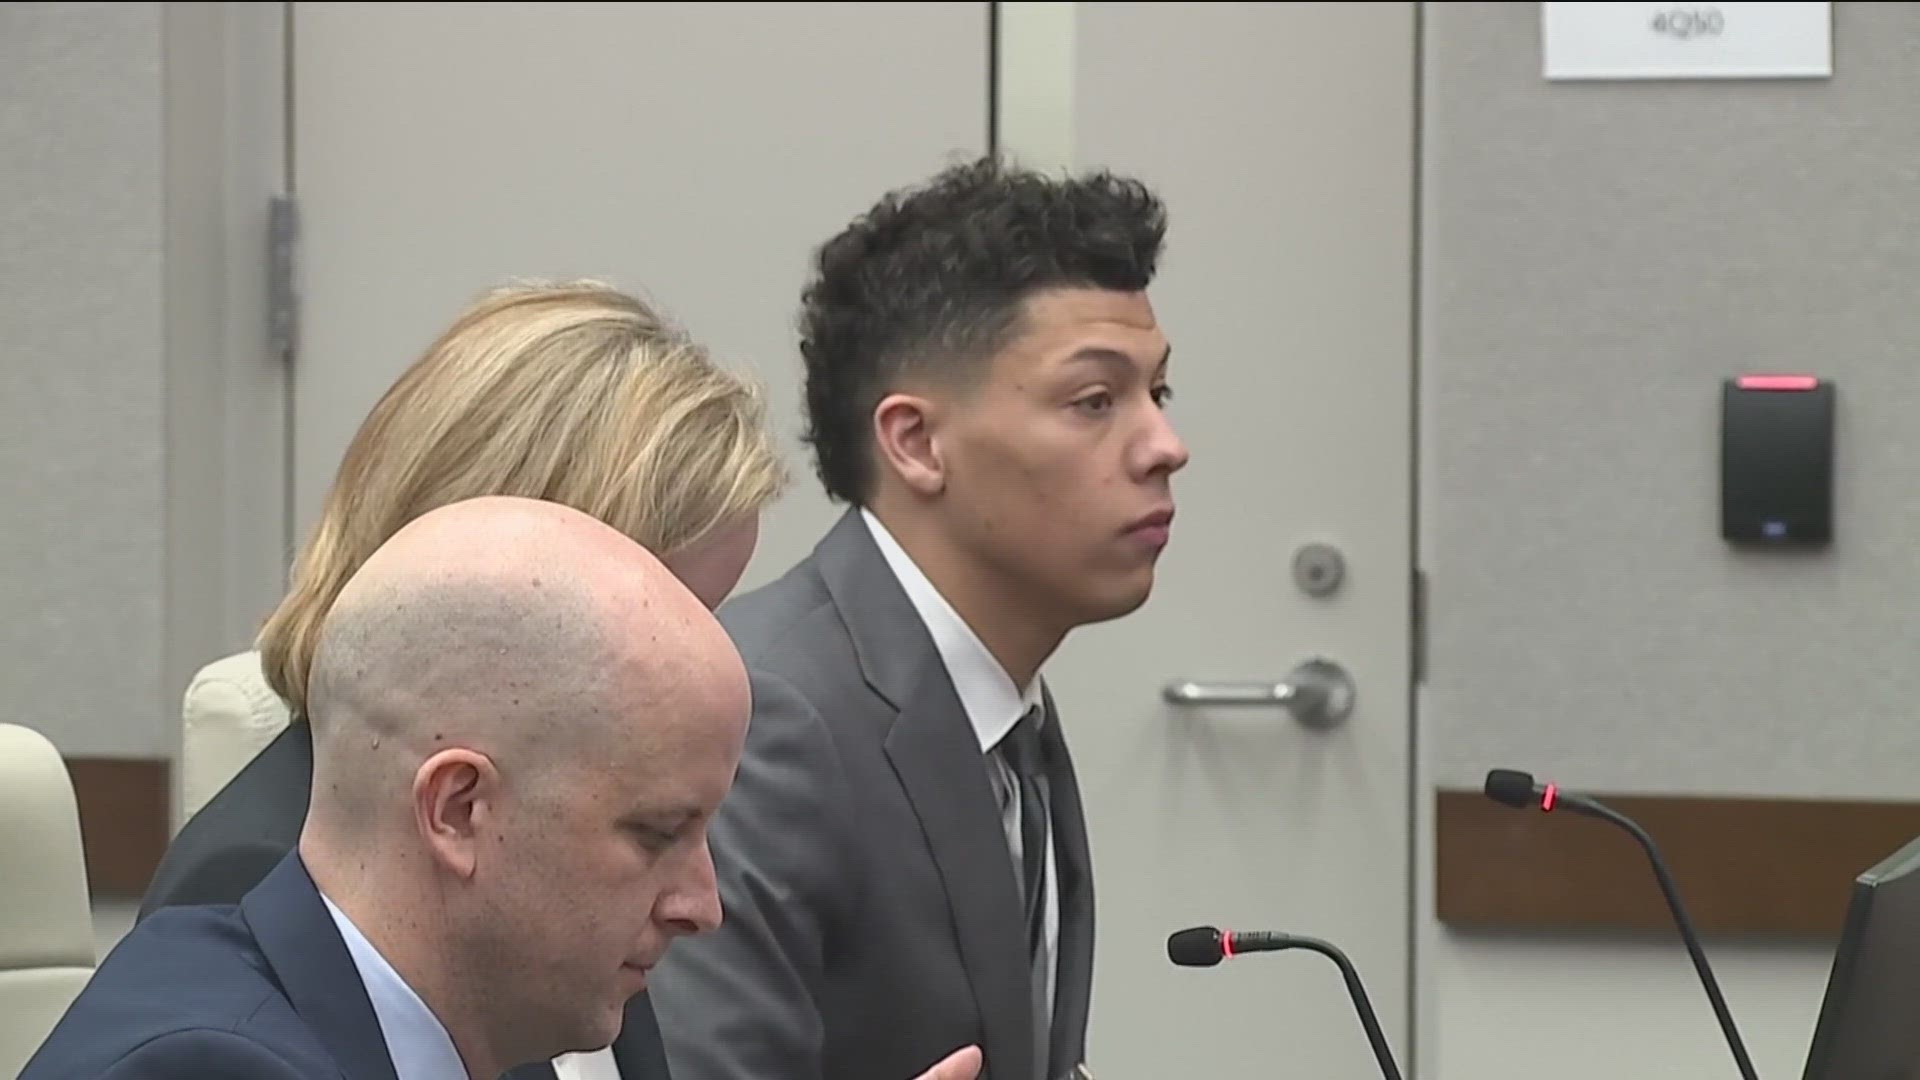 The court filing cited a lack of cooperation from the alleged victim in the case involving Jackson Mahomes — brother of Chiefs quarterback Patrick Mahomes.